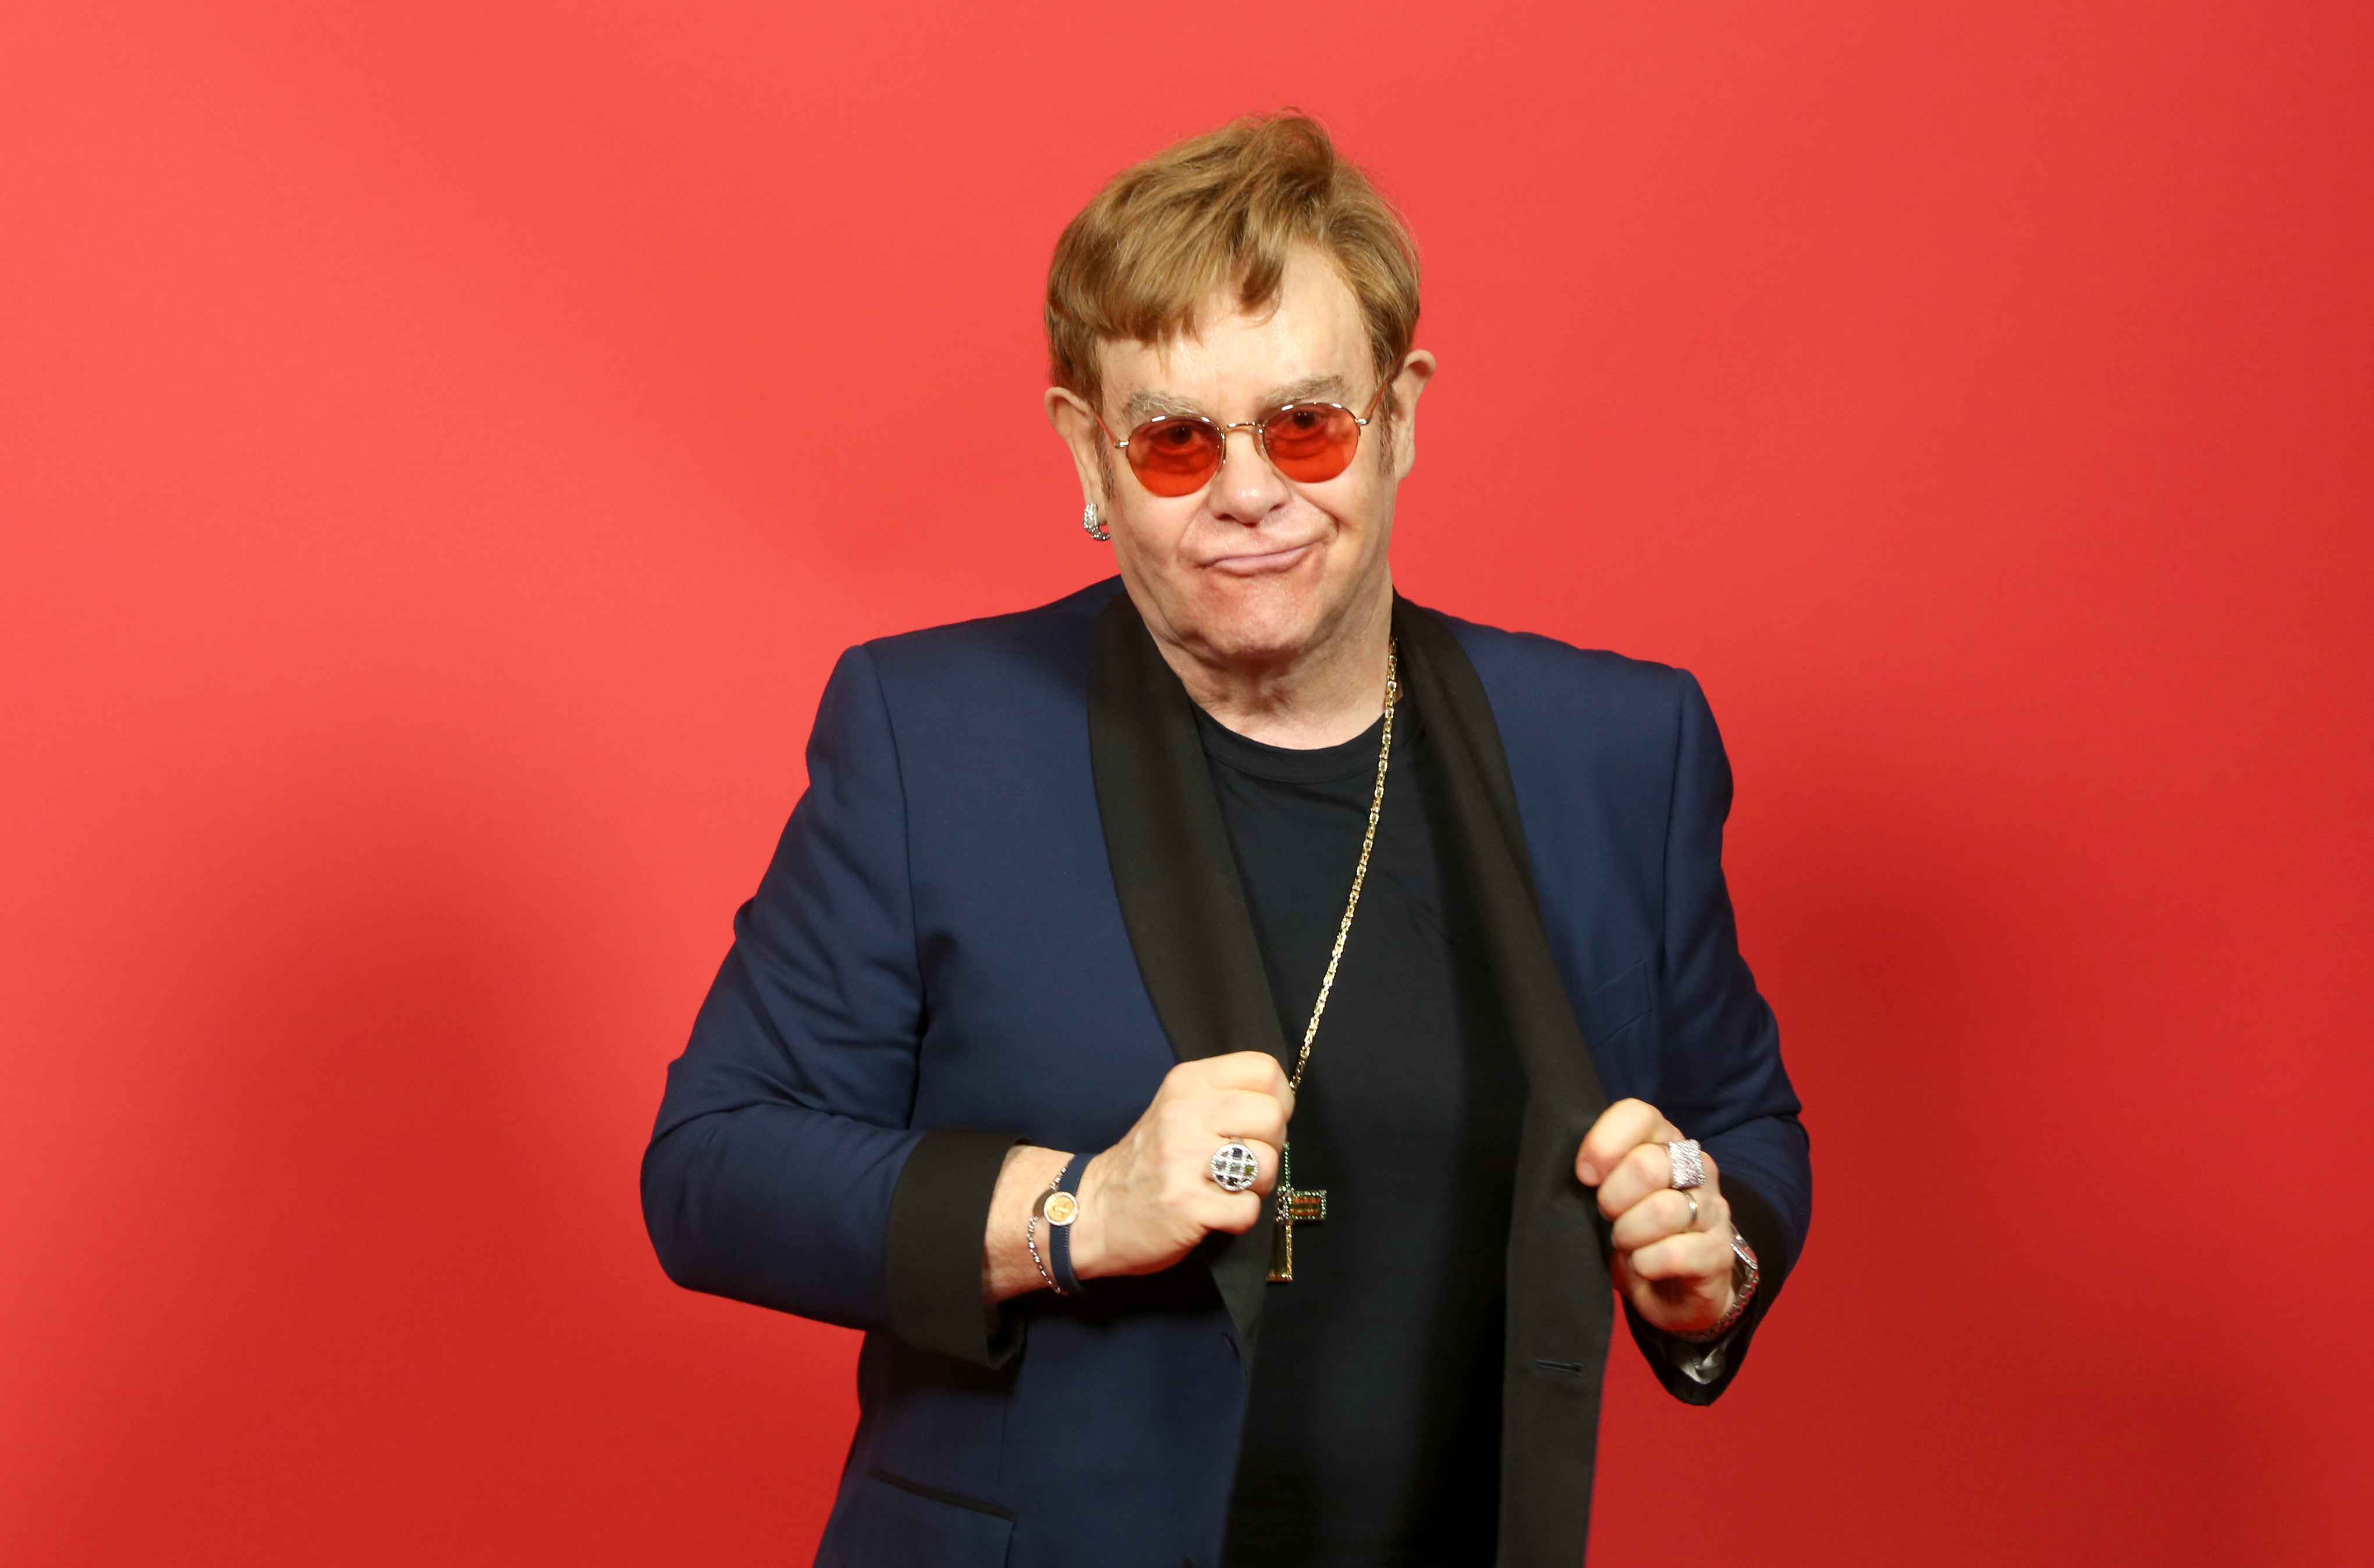 Elton John attends the 2021 iHeartRadio Music Awards at The Dolby Theatre in Los Angeles, California